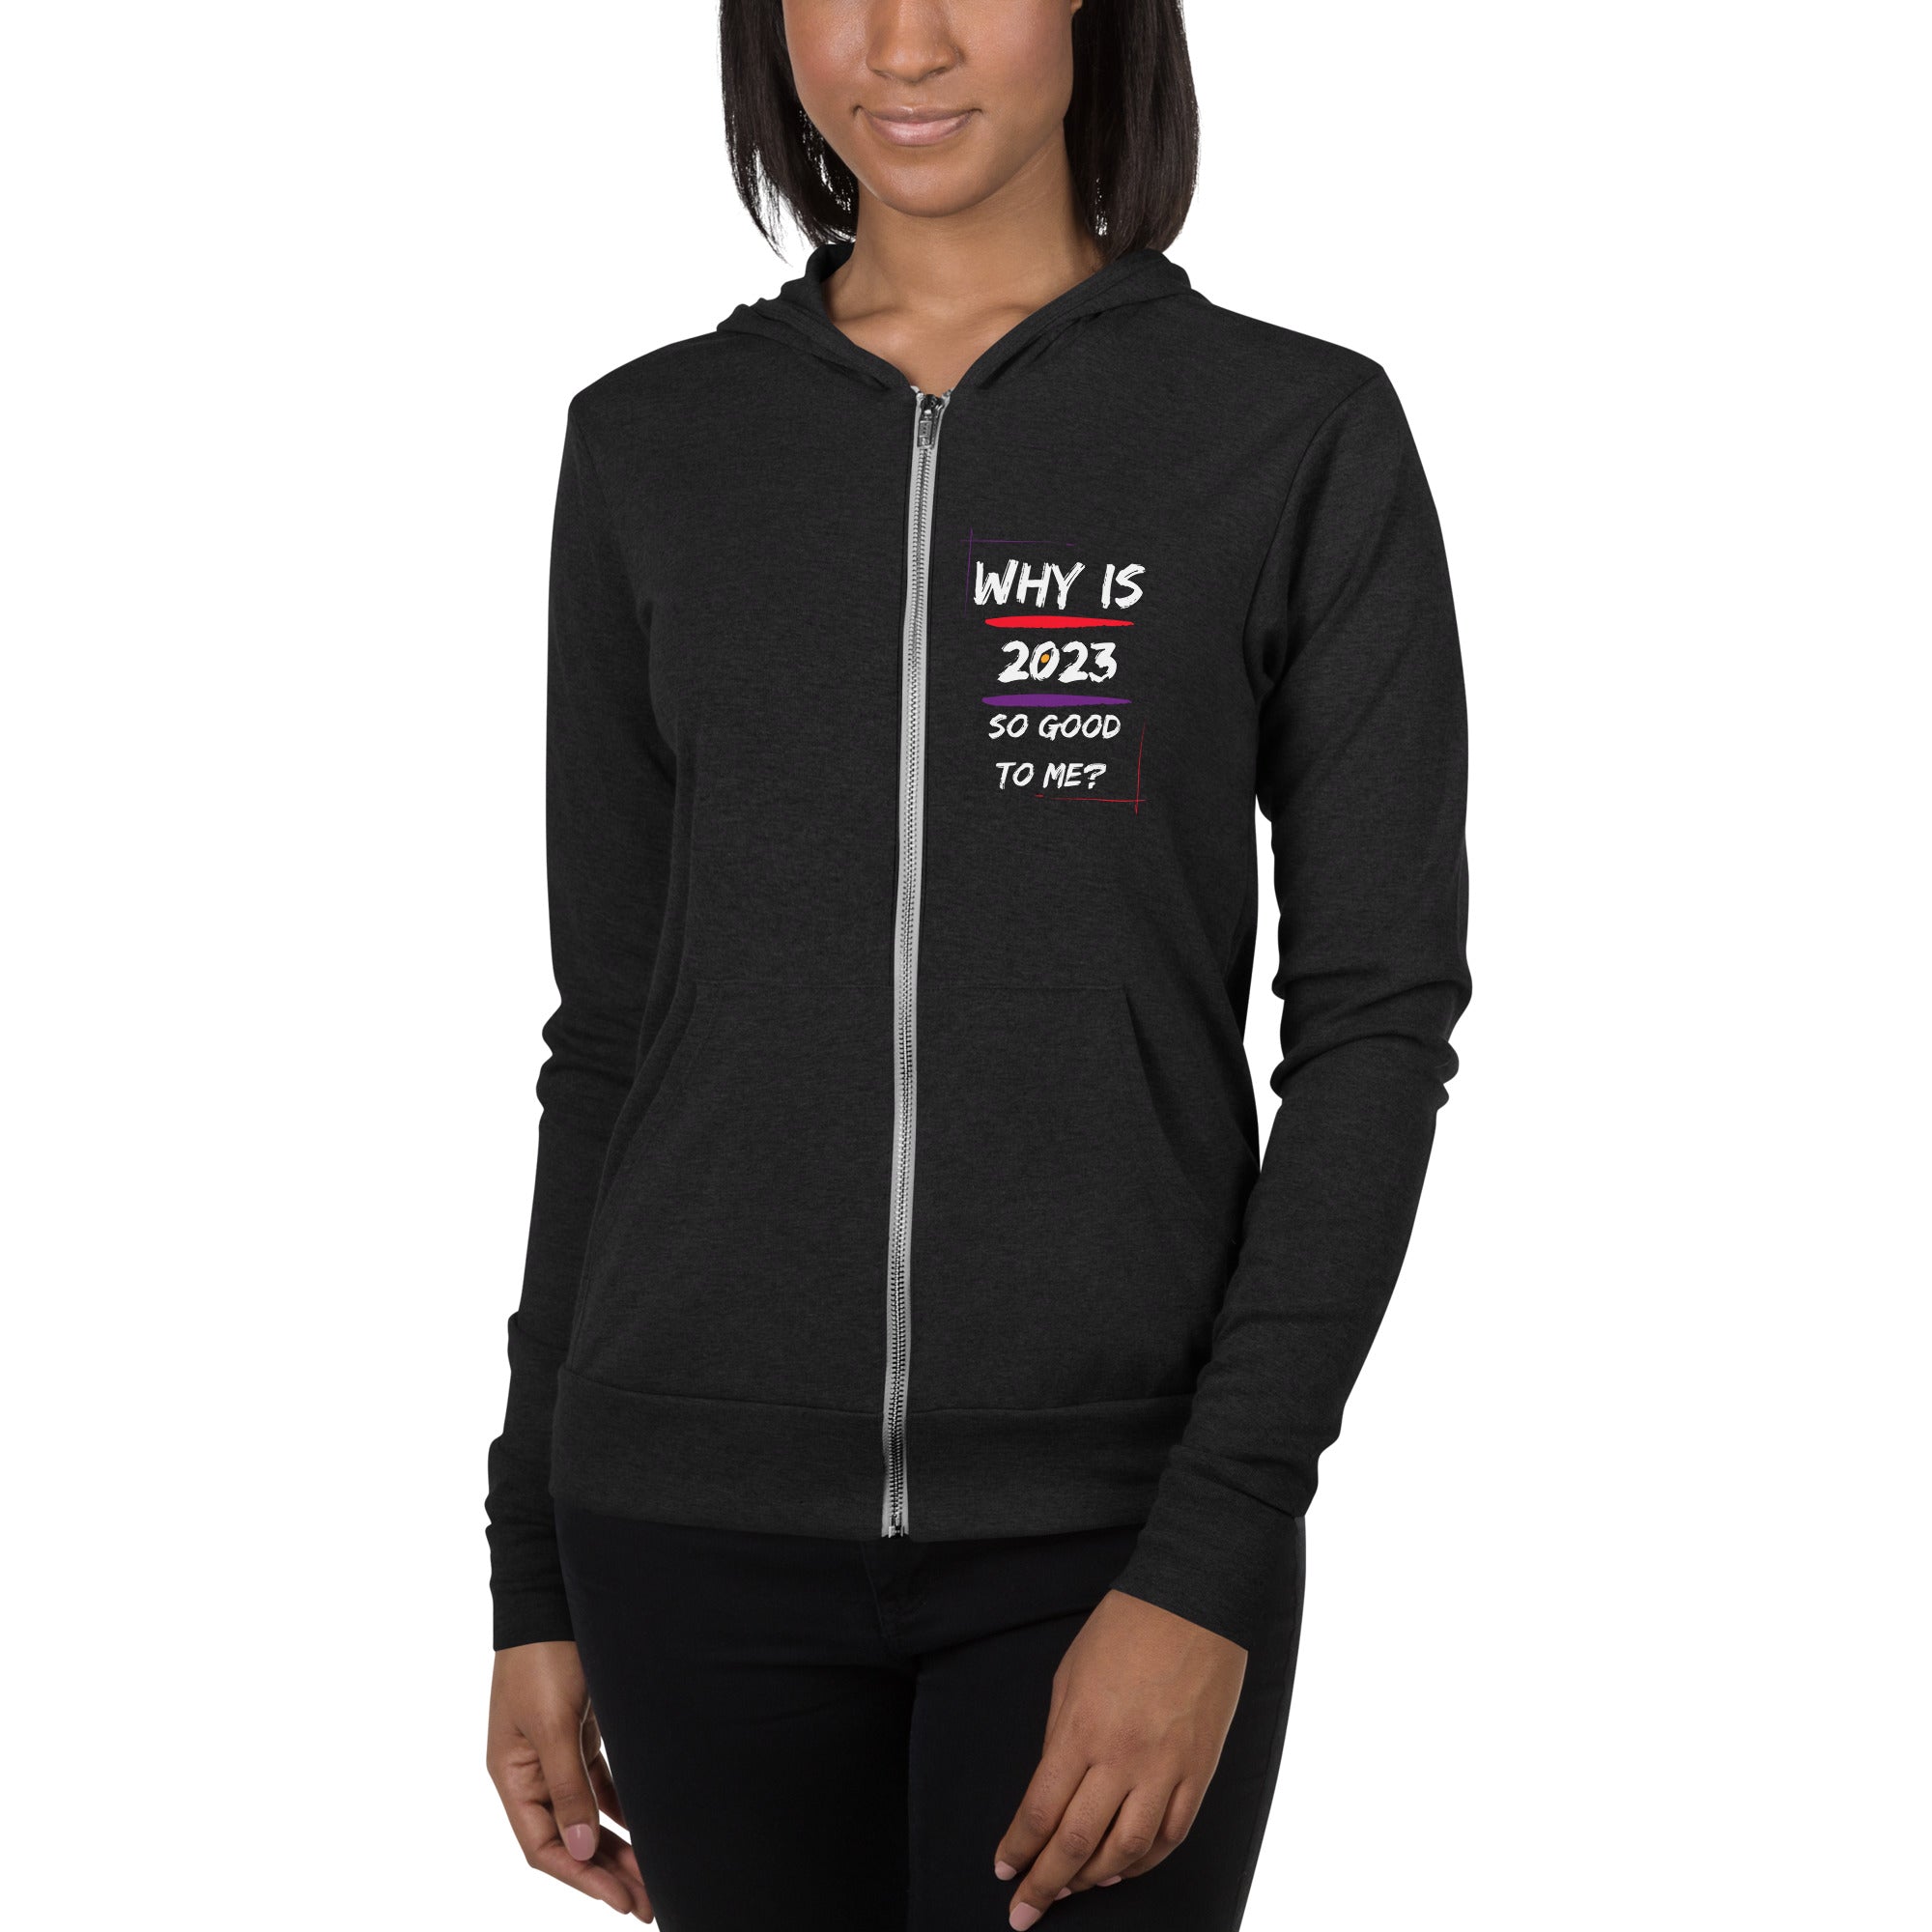 Why is 2023 so good to me - Unisex zip hoodie | Positive Affirmation Clothing